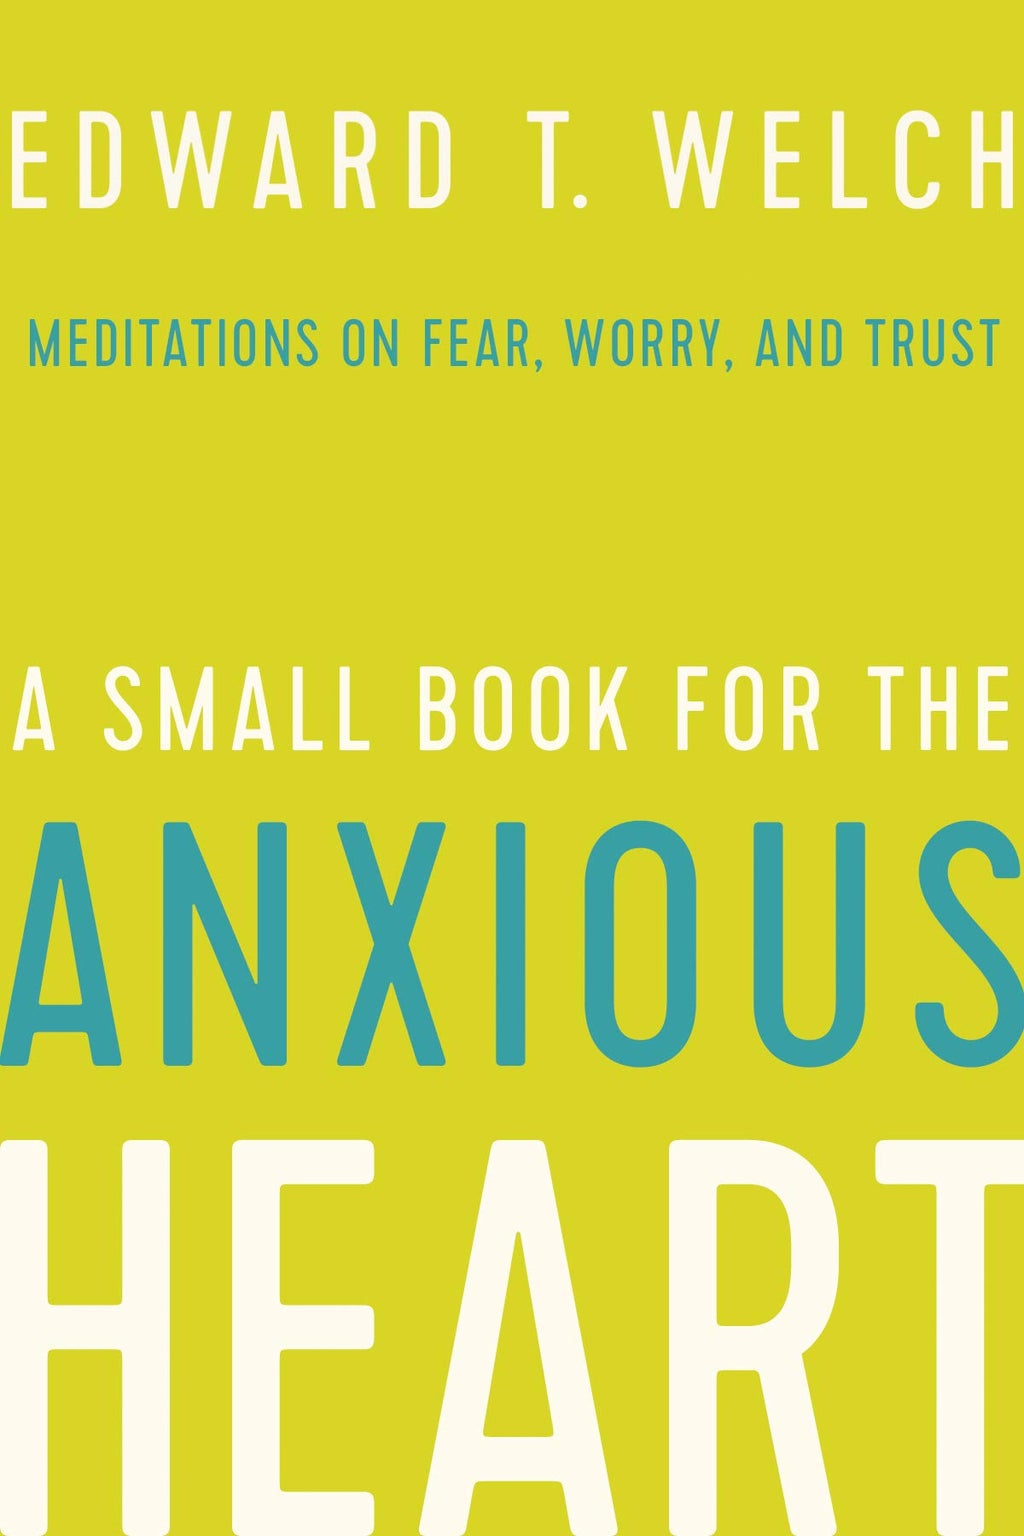 Christian Books on Anxiety – Westminster Bookstore